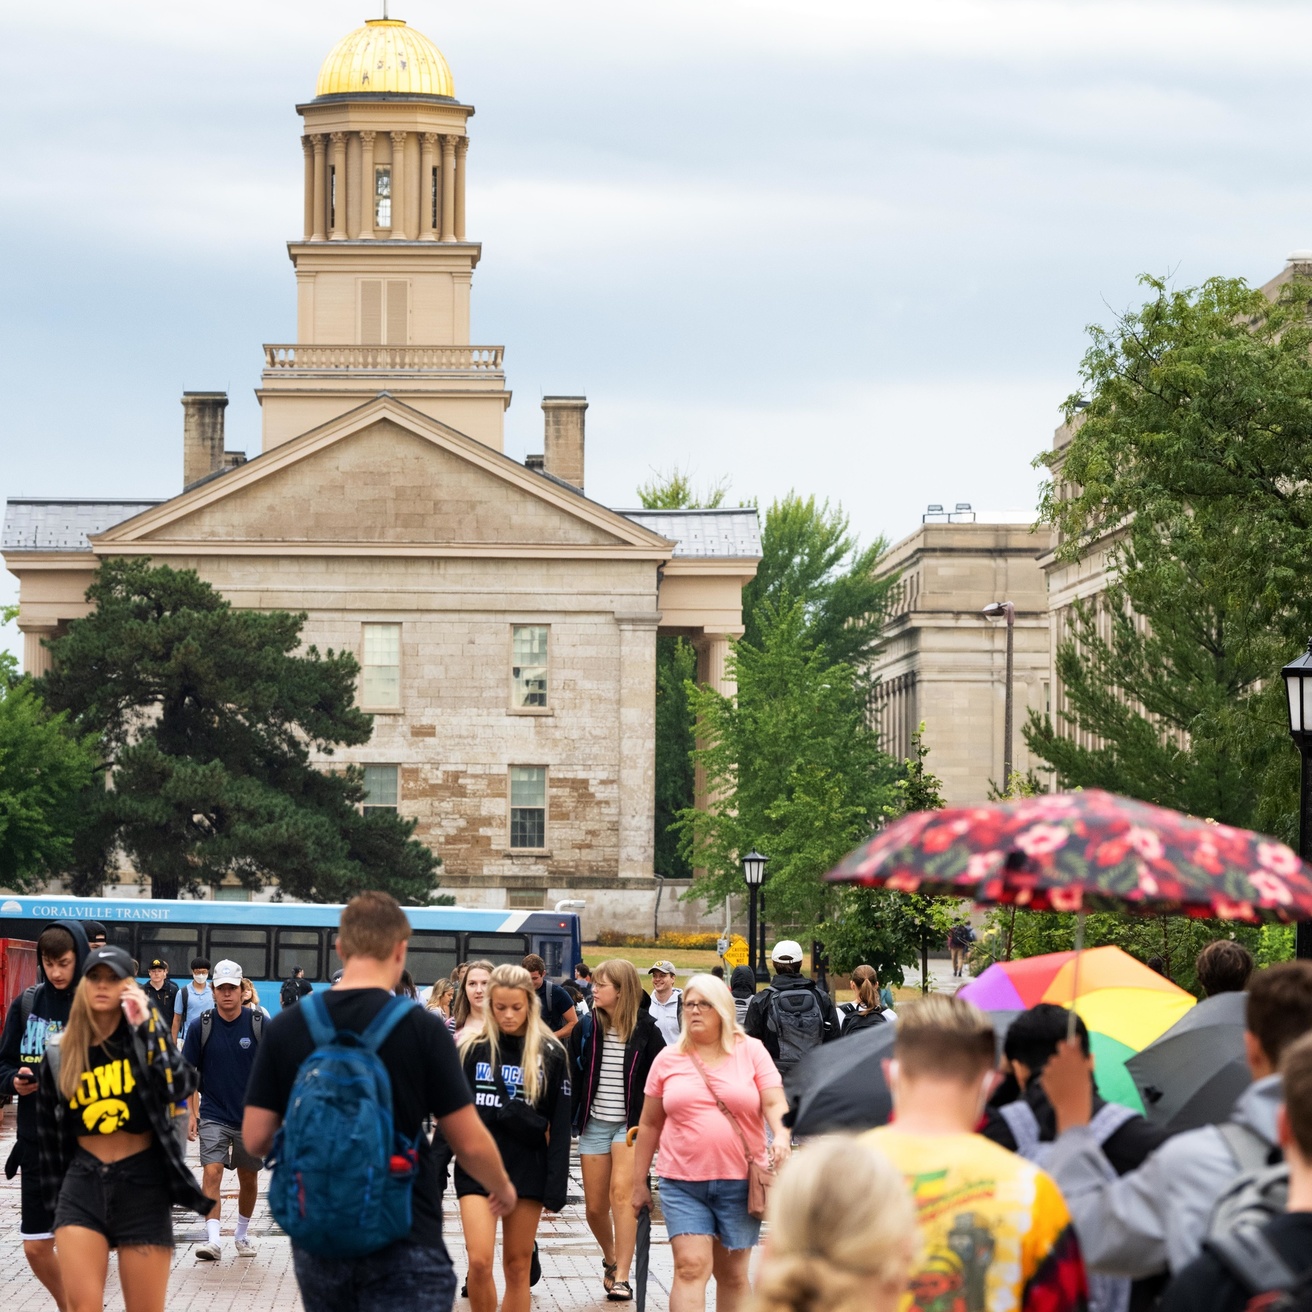 Students walk across the Pentacrest on the first day of classes with the Old Capitol building in the background